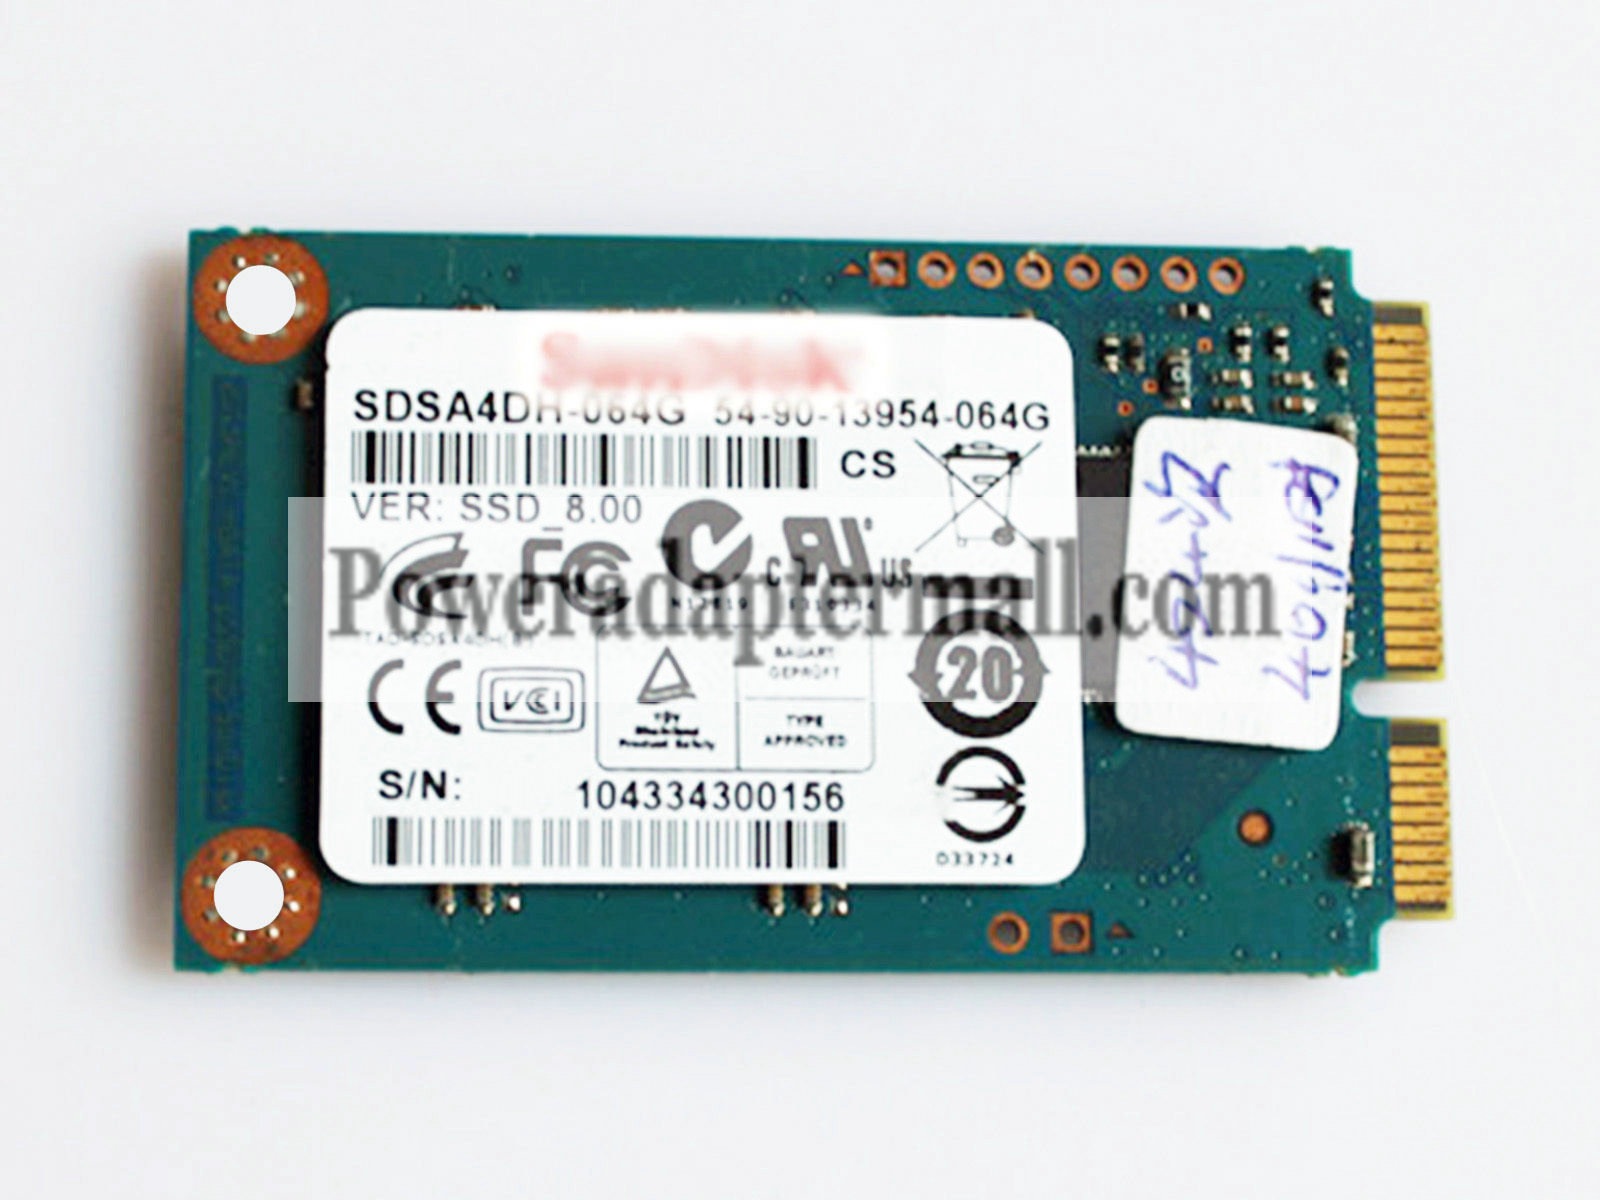 Sandisk 64GB SSD SDSA4DH-064G 54-90-13954-064G Solid State Drive